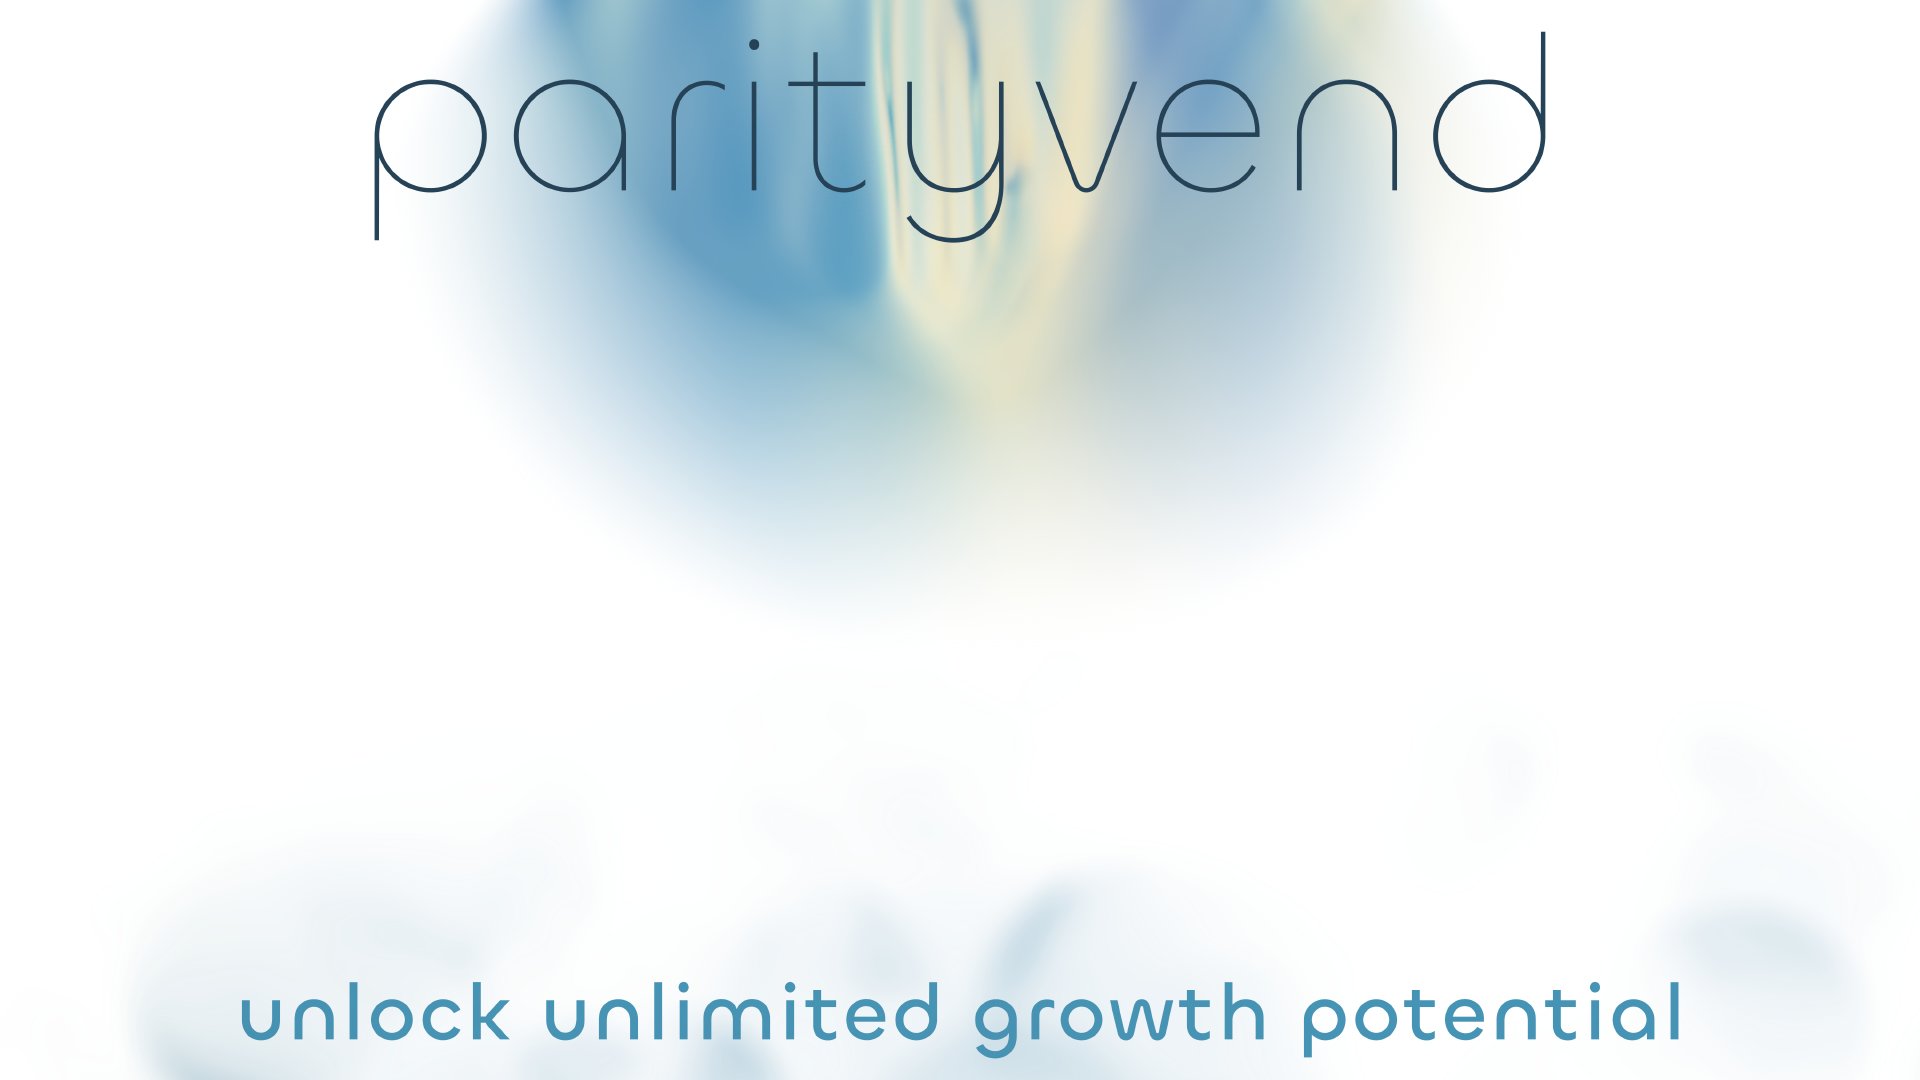 Unlock unlimited growth potential with ParityVend - automatically.